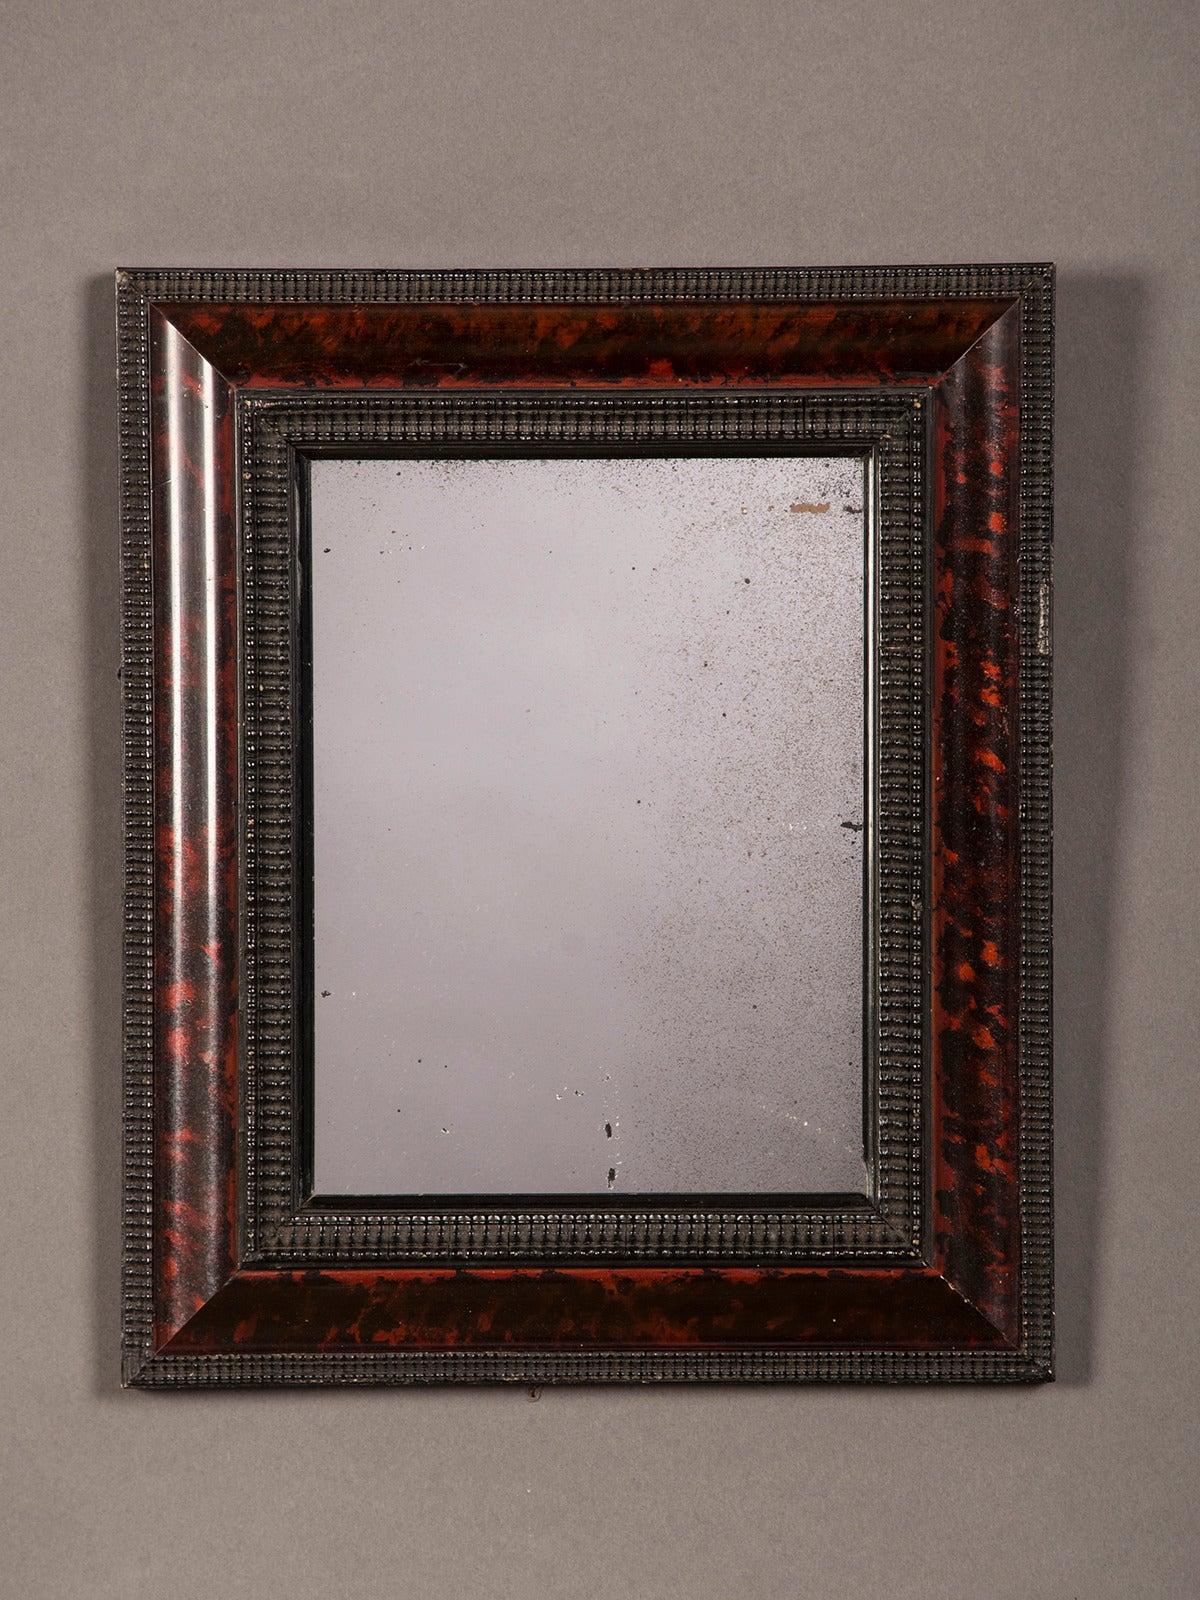 A Dutch style frame of ebonized timber enclosing a beautiful border of hand-painted faux tortoise shell from Holland circa 1865 surrounding the original mercury glass mirror. The diminutive size of this mirror harkens back to the days of the 16th